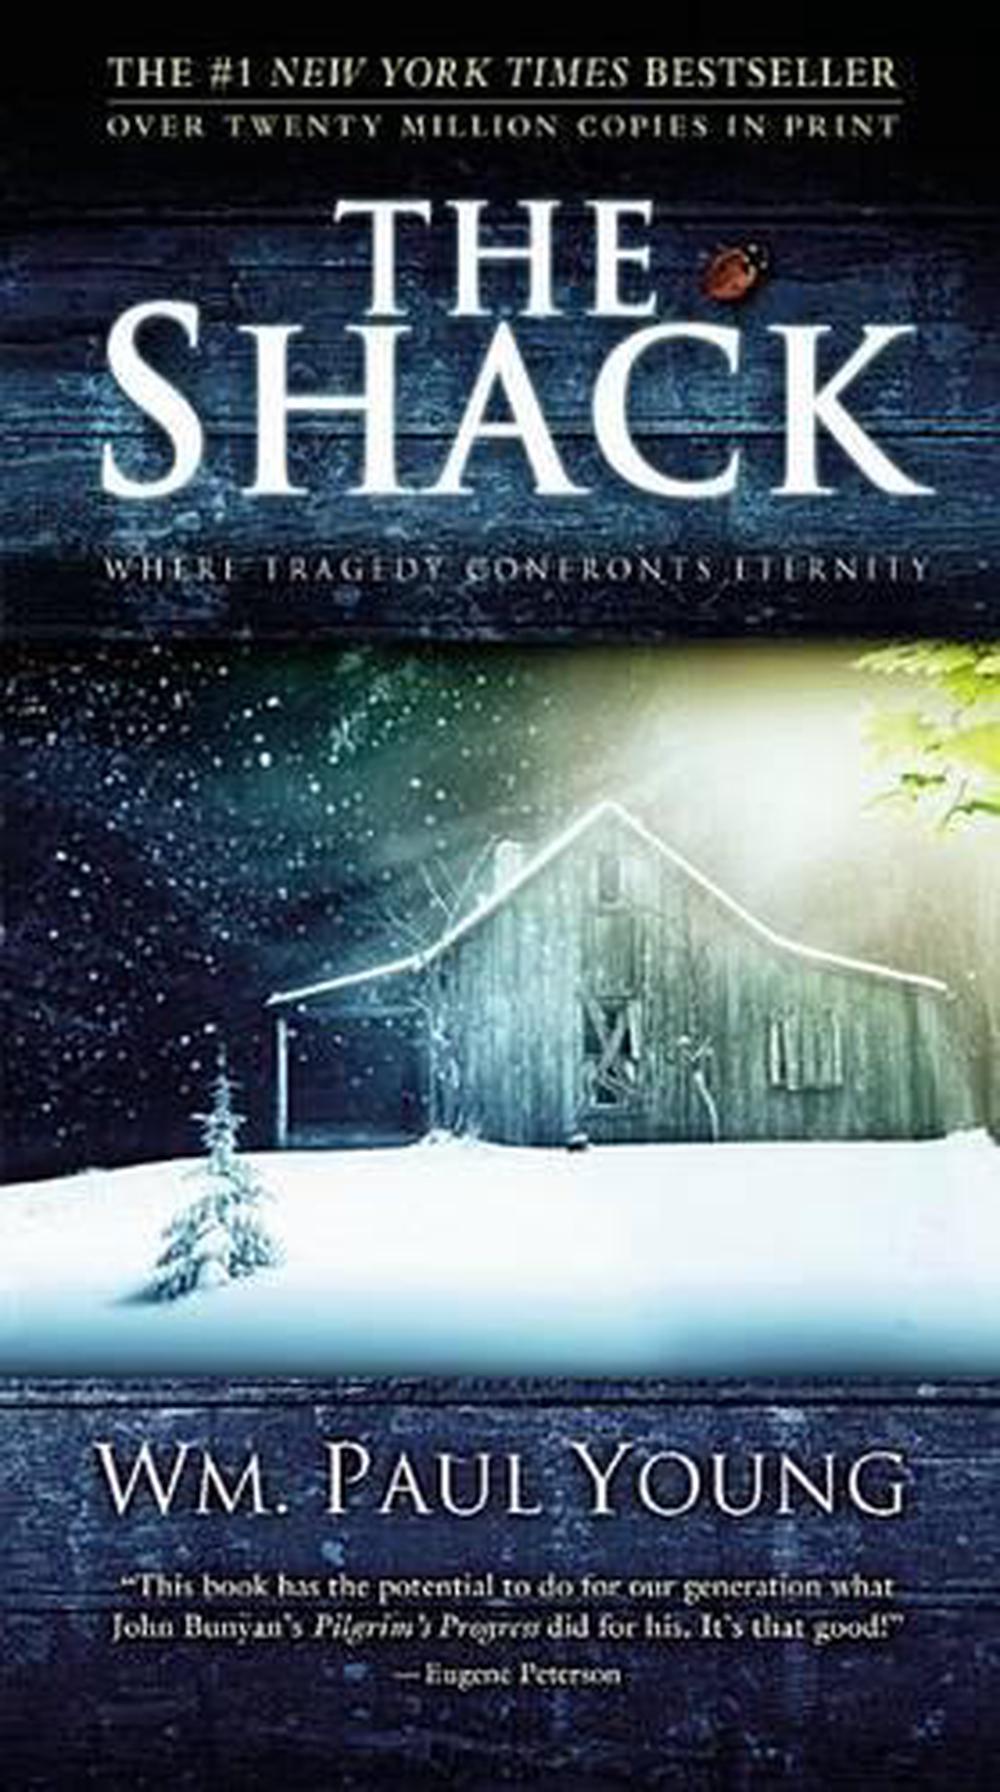 book the shack by william paul young